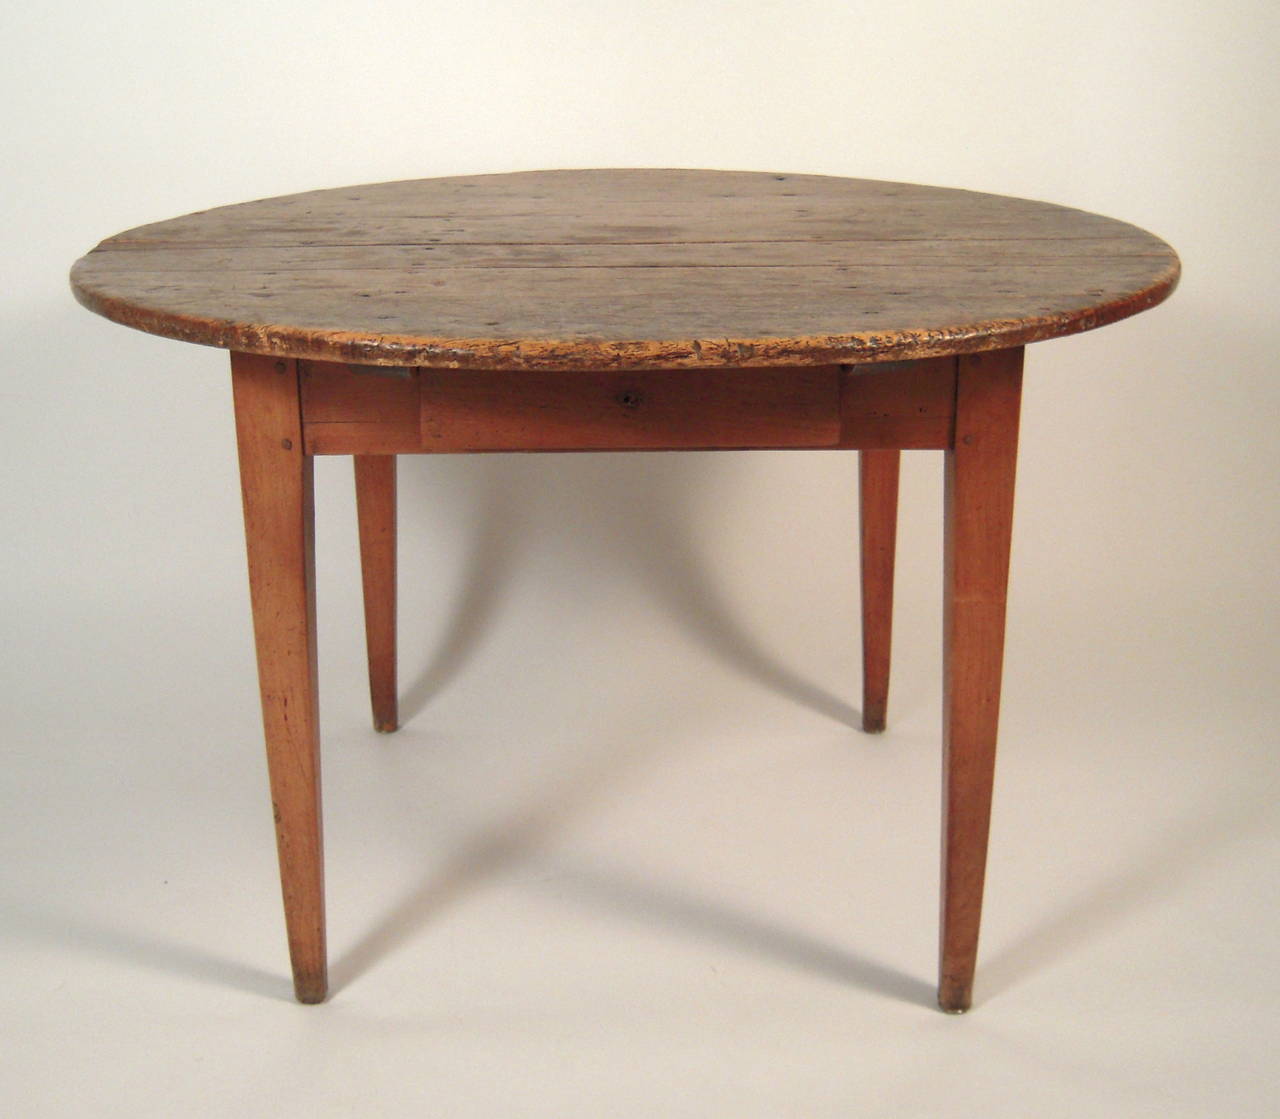 An inventive and unusual, American country two-part dining table in chestnut, the circular, free-standing portion from the late 18th or early 19th century, with a later, racetrack shaped extension, with hinged folding legs, which easily slides in to